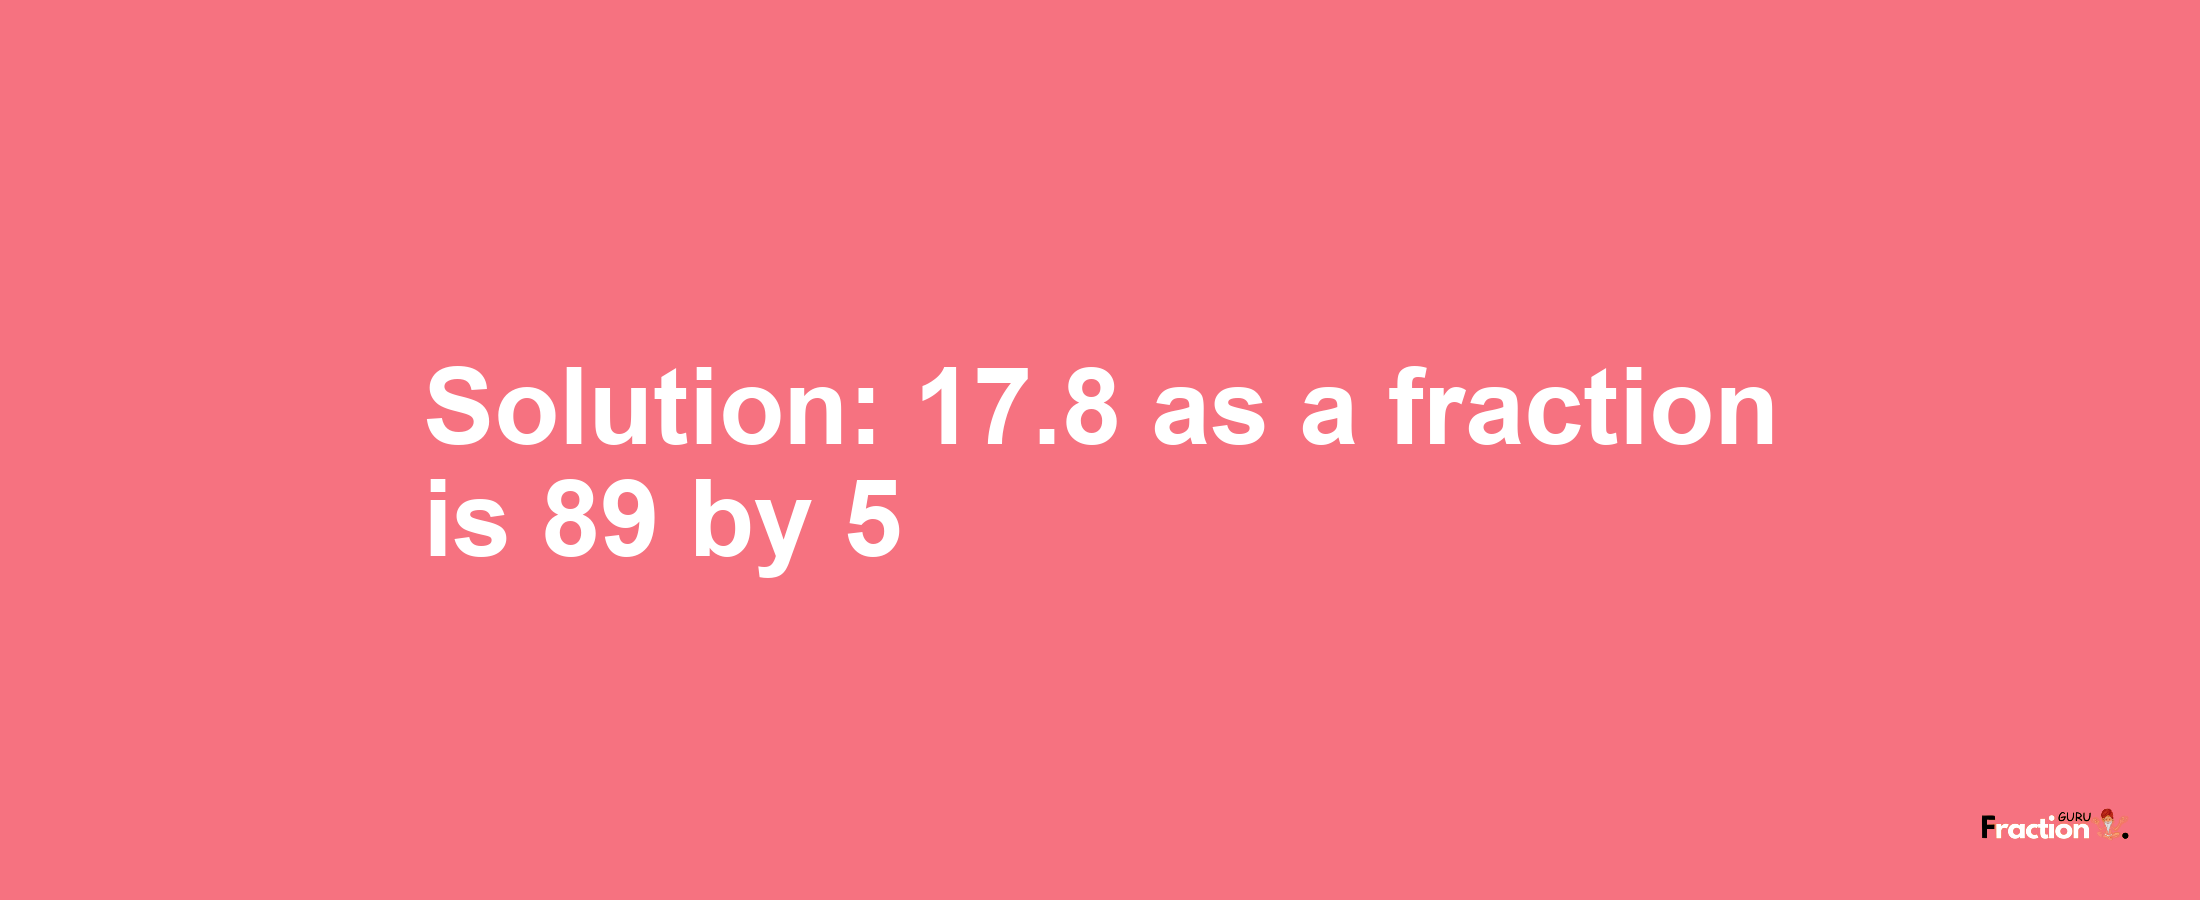 Solution:17.8 as a fraction is 89/5